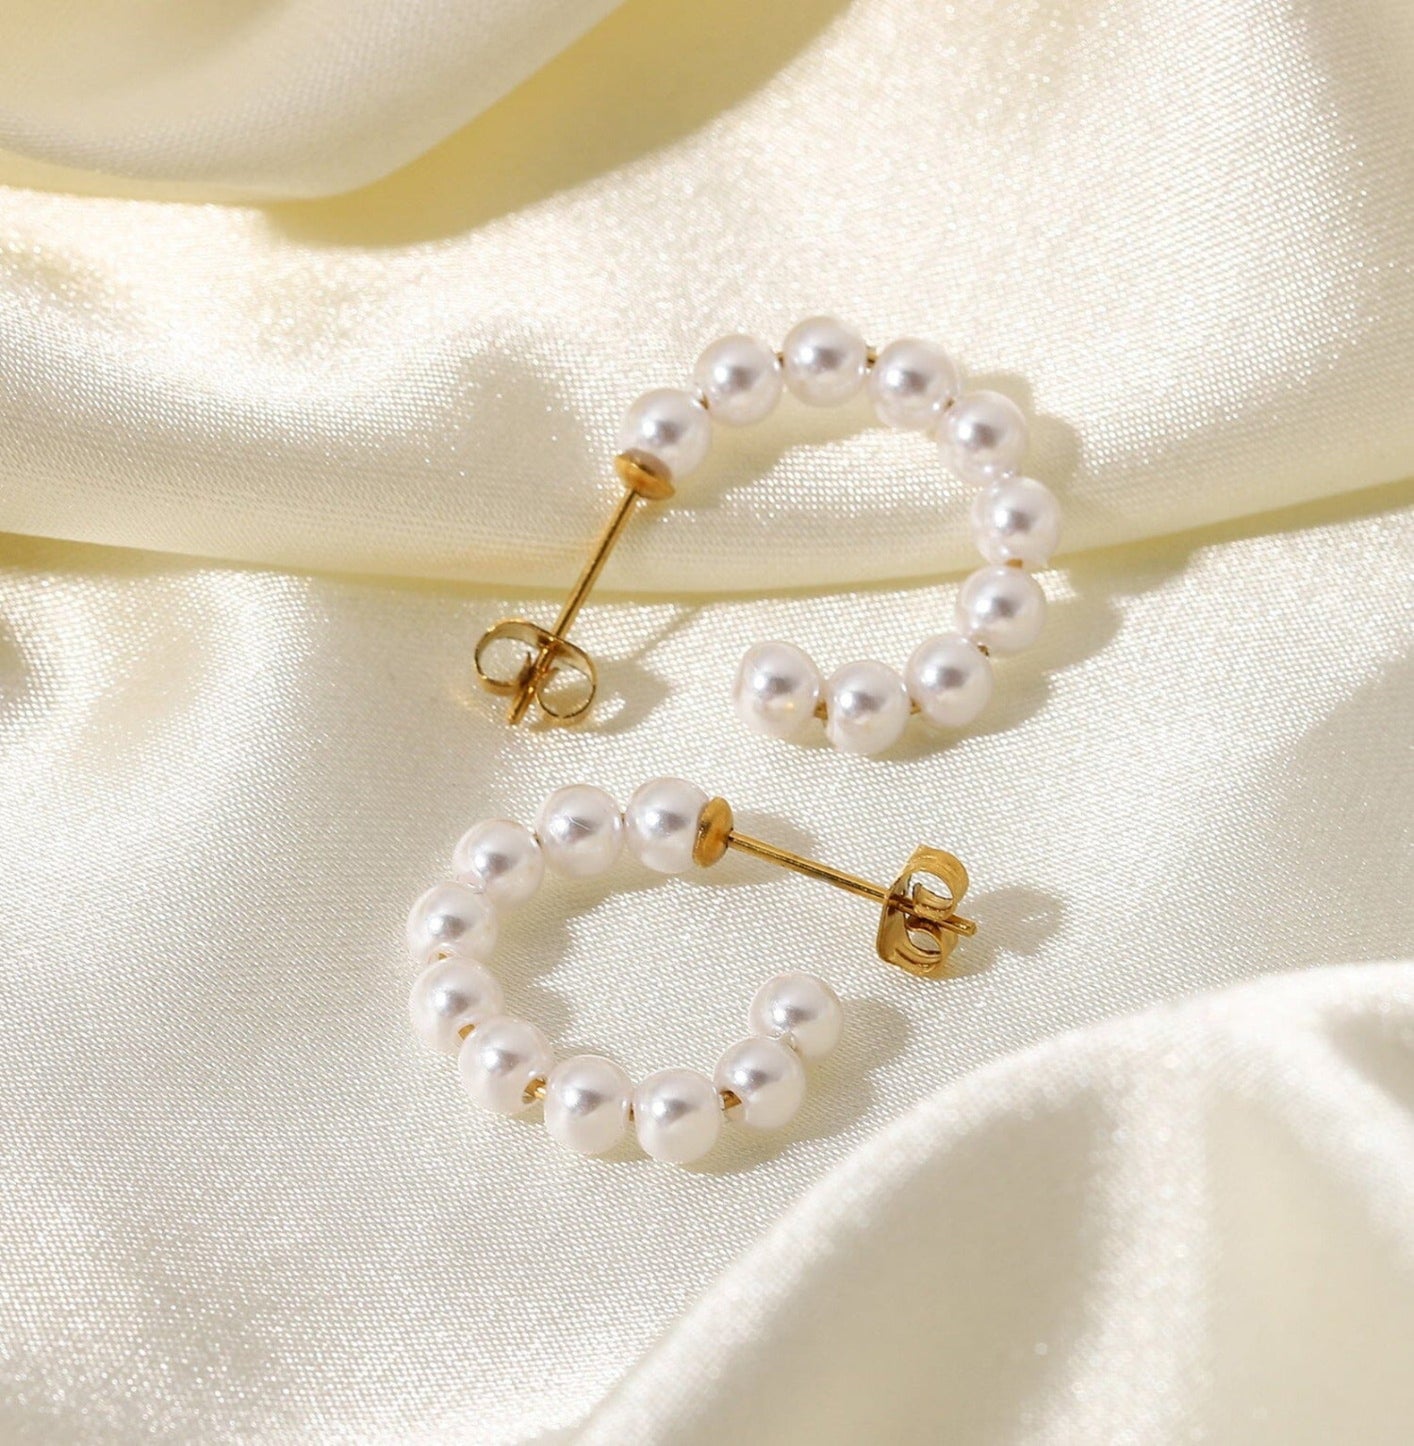 MINI PEARL EARRINGS earing Yubama Jewelry Online Store - The Elegant Designs of Gold and Silver ! 